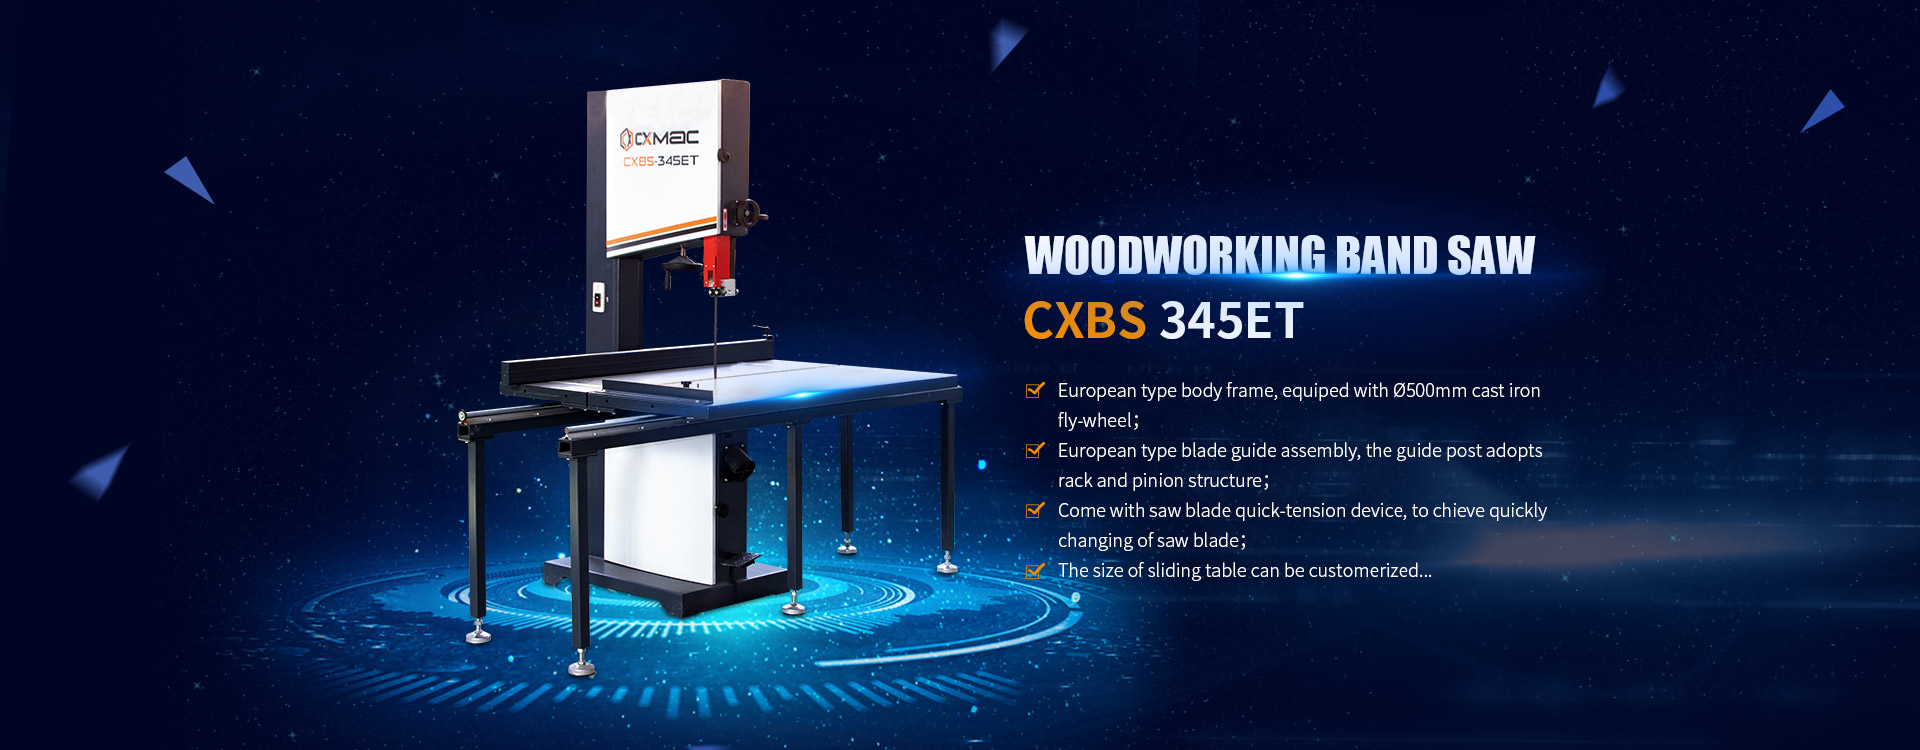 WOODWORKING BAND SAW CXBS 345ET